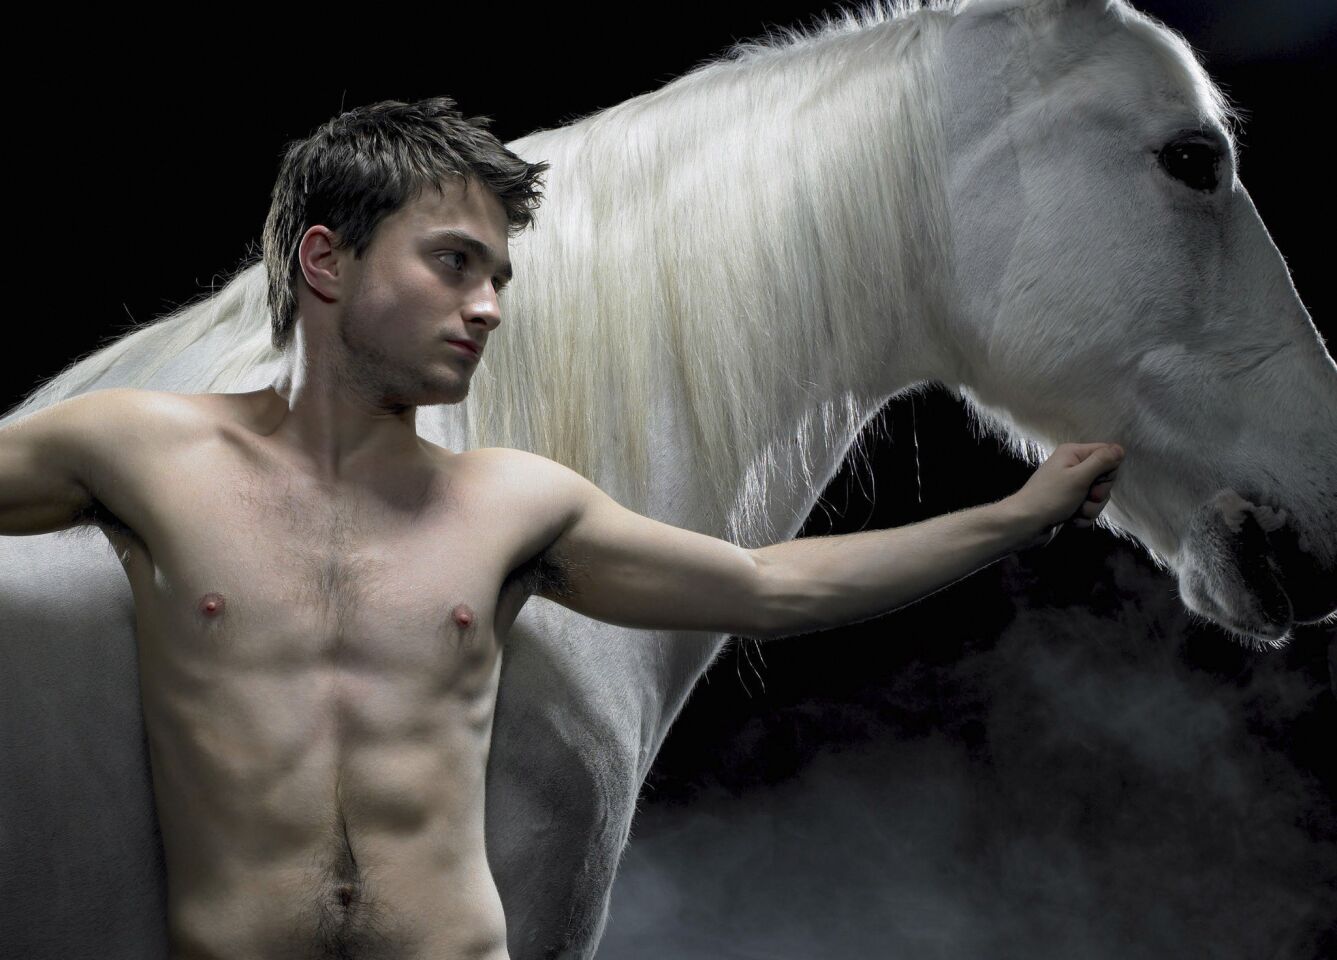 Daniel Radcliffe went from boy wizard in "Harry Potter" to baring all in a Broadway revival of Peter Shaffer's 1973 Tony-winning play "Equus." The casting of the "Harry Potter" frontman as the psychologically disturbed stable boy caused a stir as the then 17-year-old would appear nude in one scene. Radcliffe wowed critics and earned a Drama Desk nomination for his role.